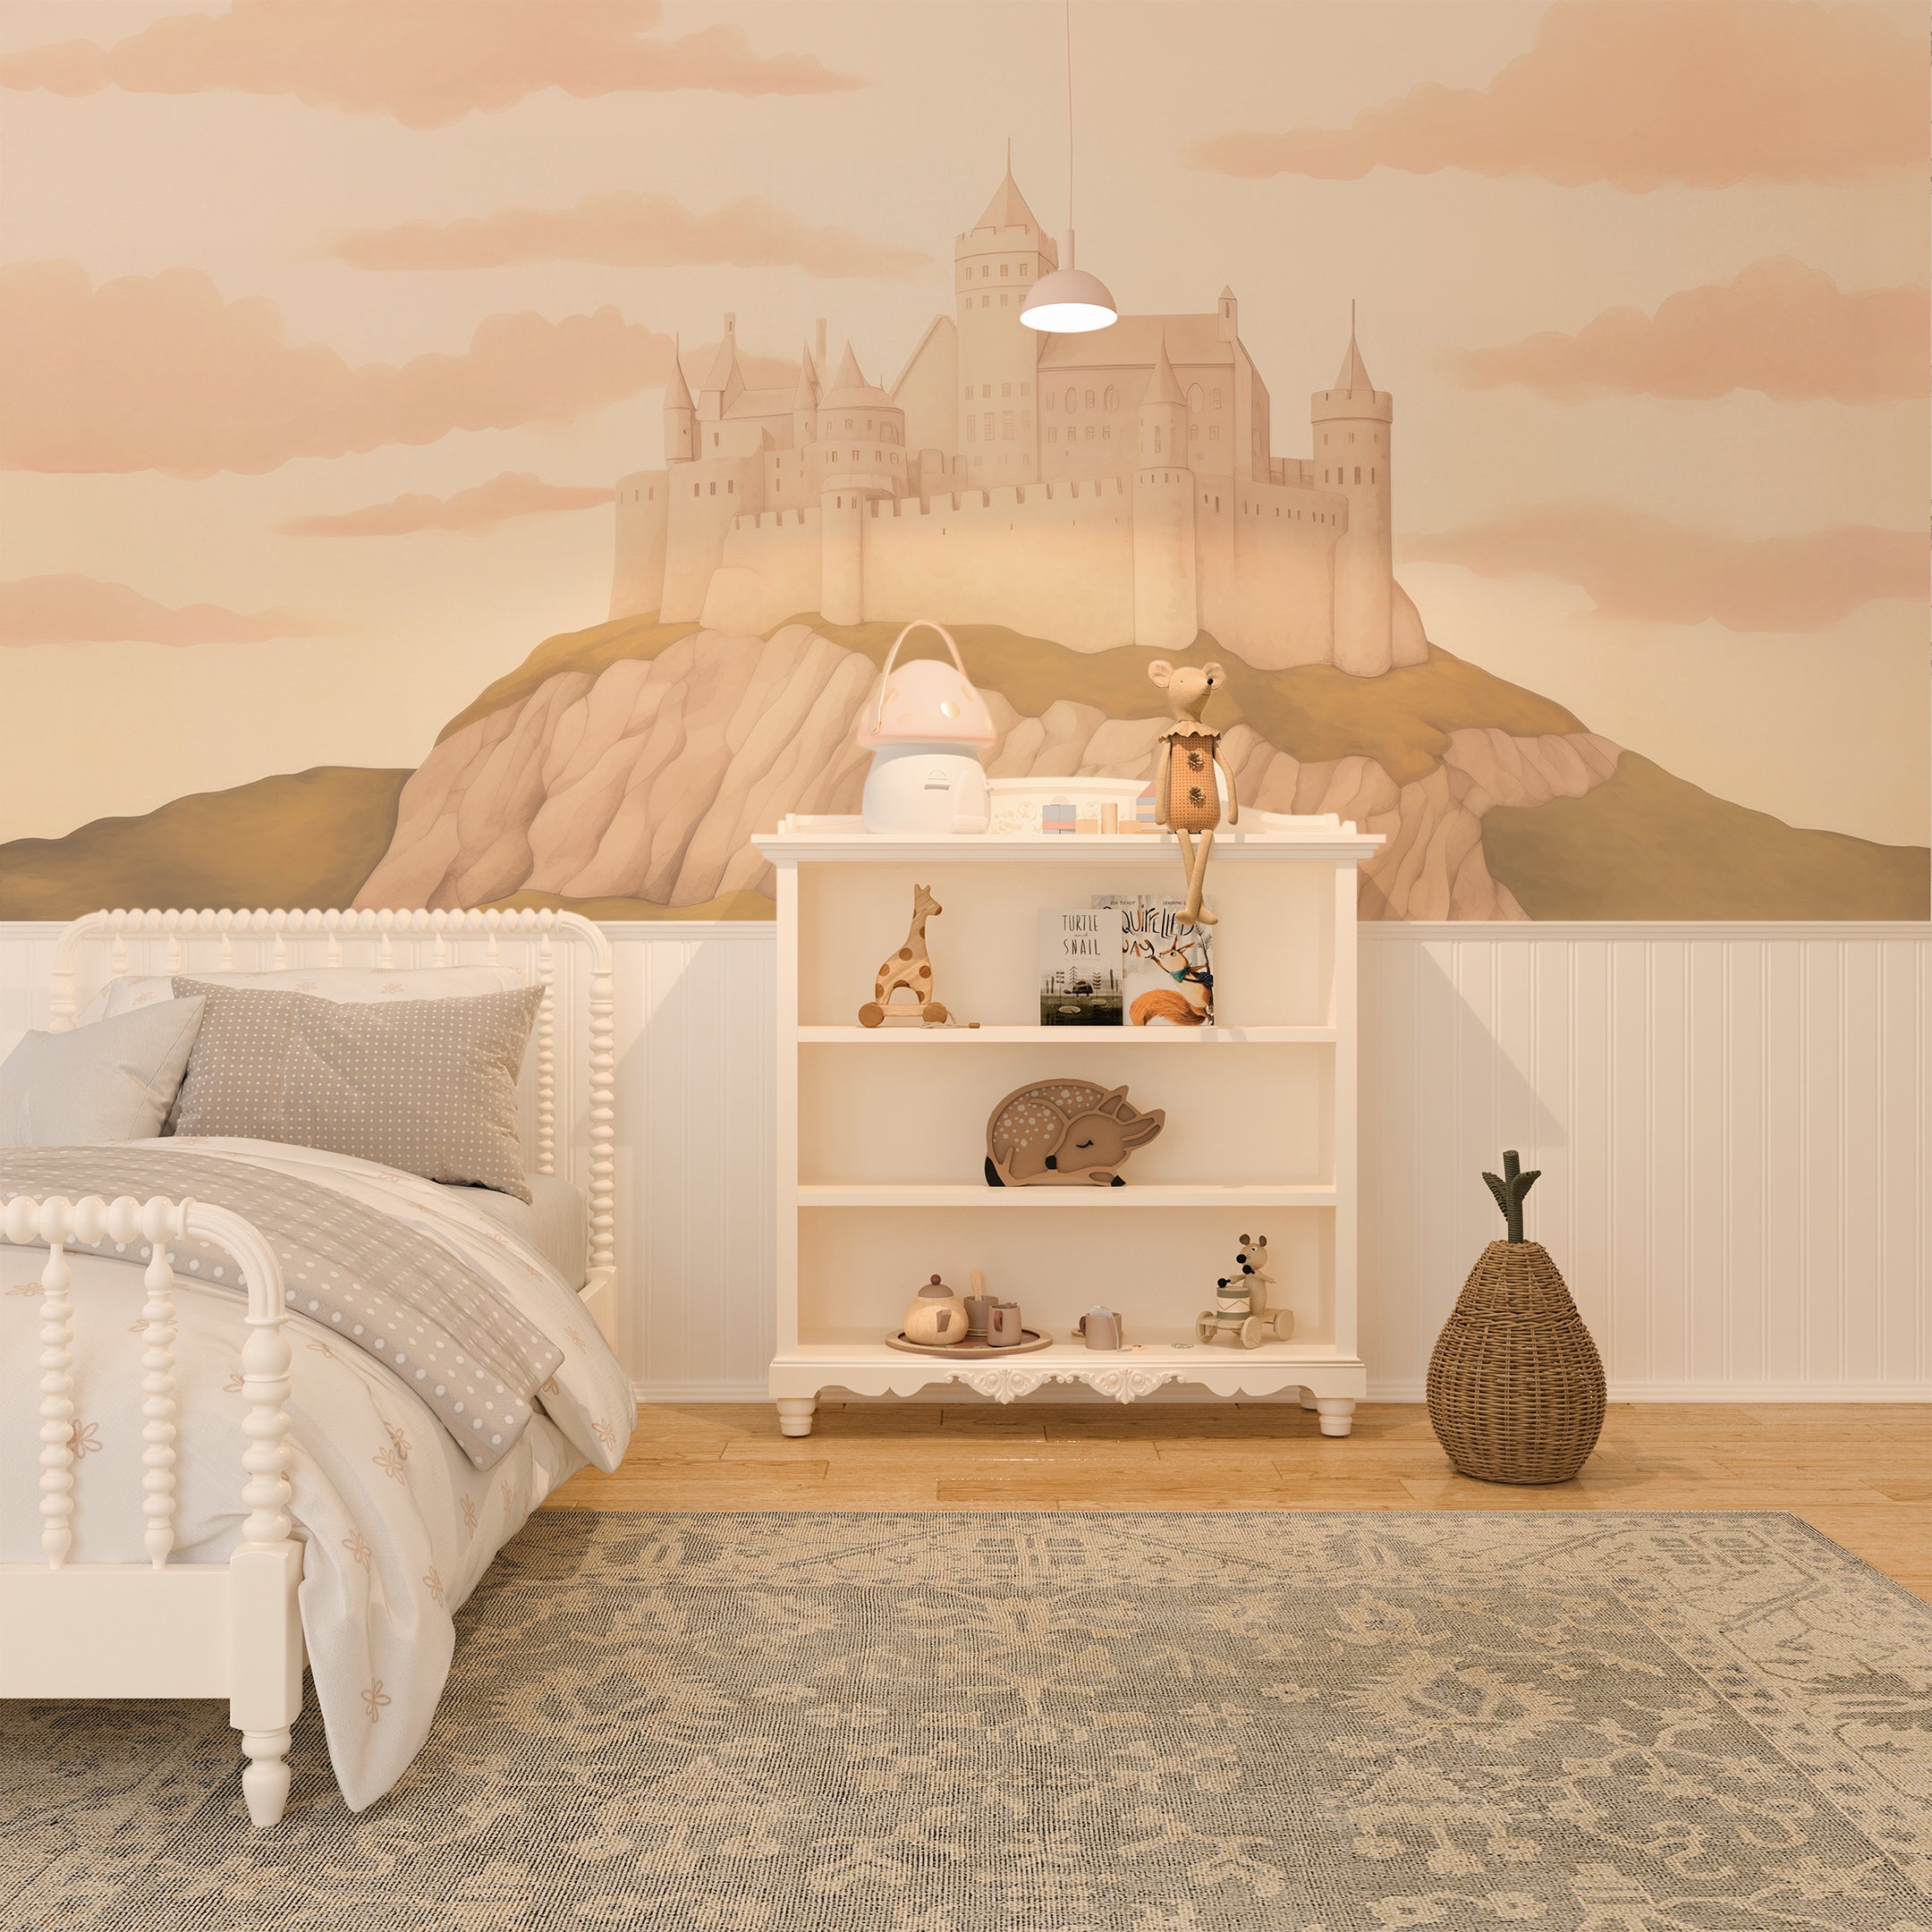 Child's bedroom with pastel castle mural on the wall, white furniture, and soft toy decorations creating a storybook ambiance